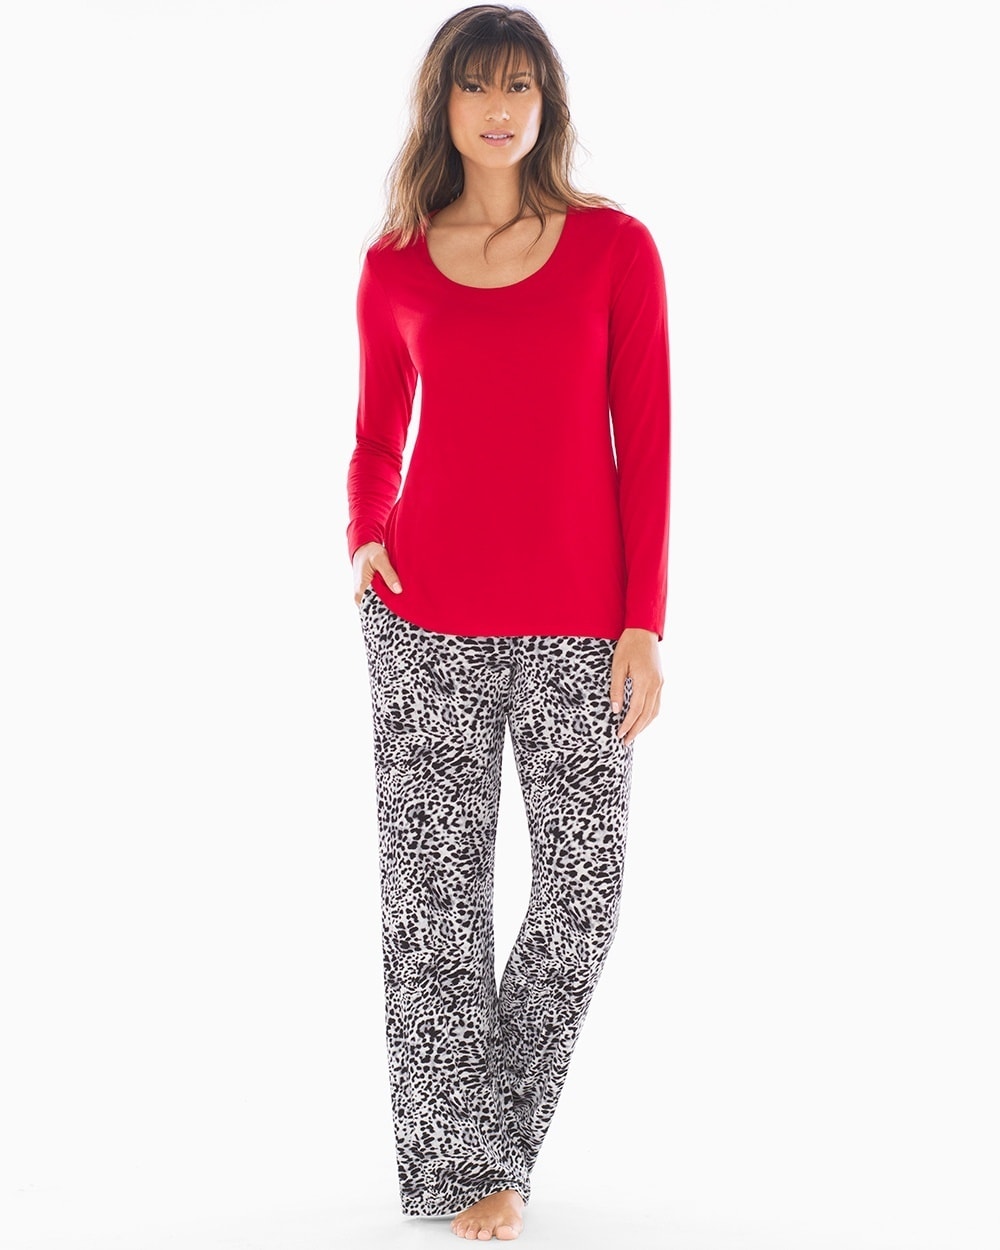 Cool Nights Scoopneck Long Sleeve Pajama Set Spotted Mini Festive Red TL